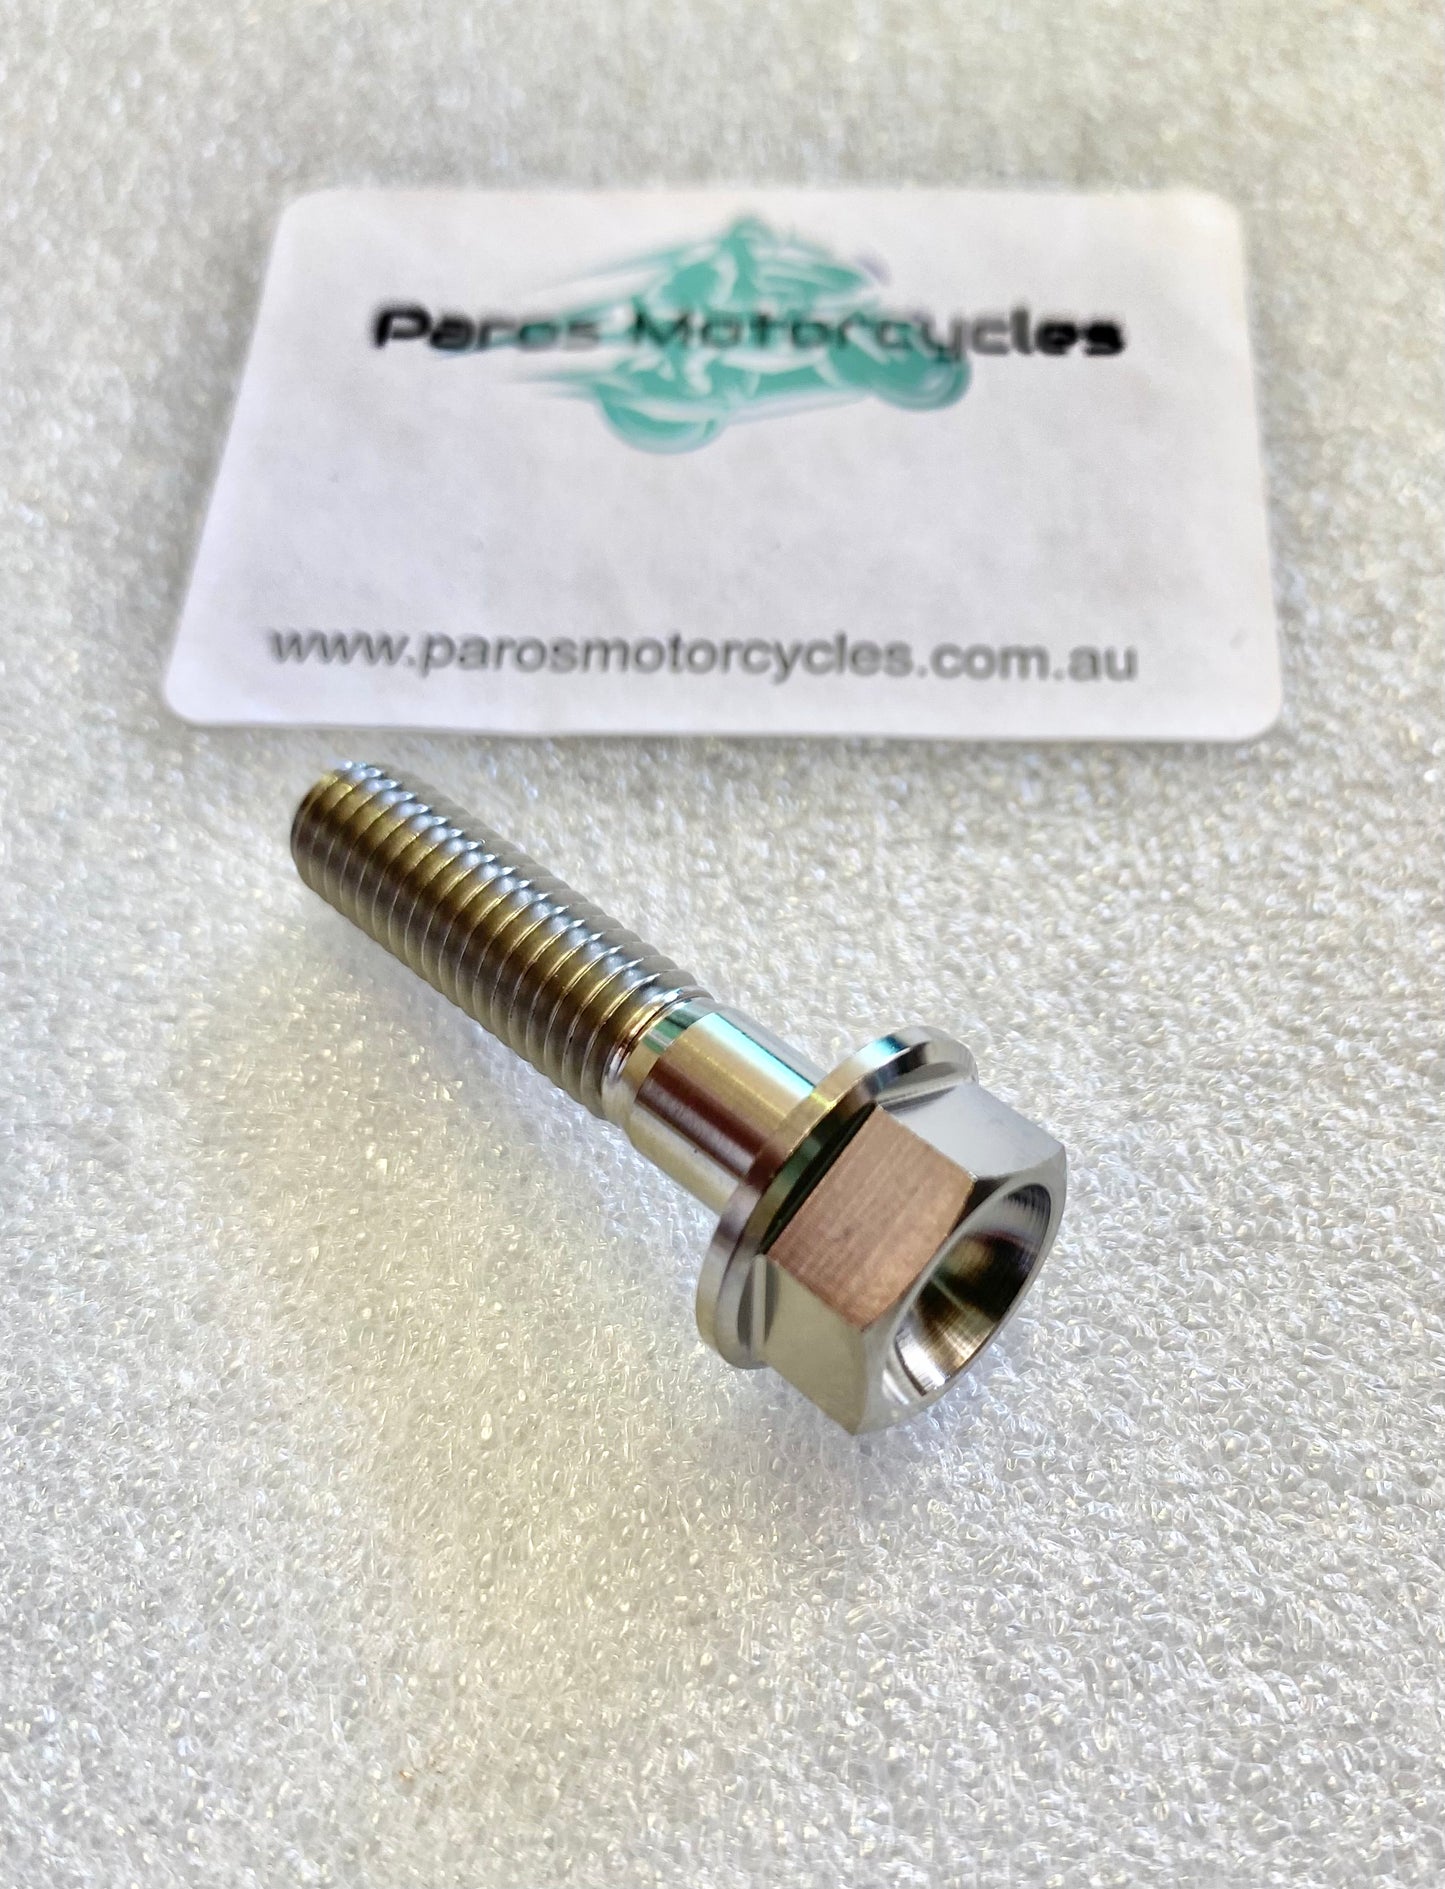 M8 LARGE FLANGED HEX HEAD BOLT